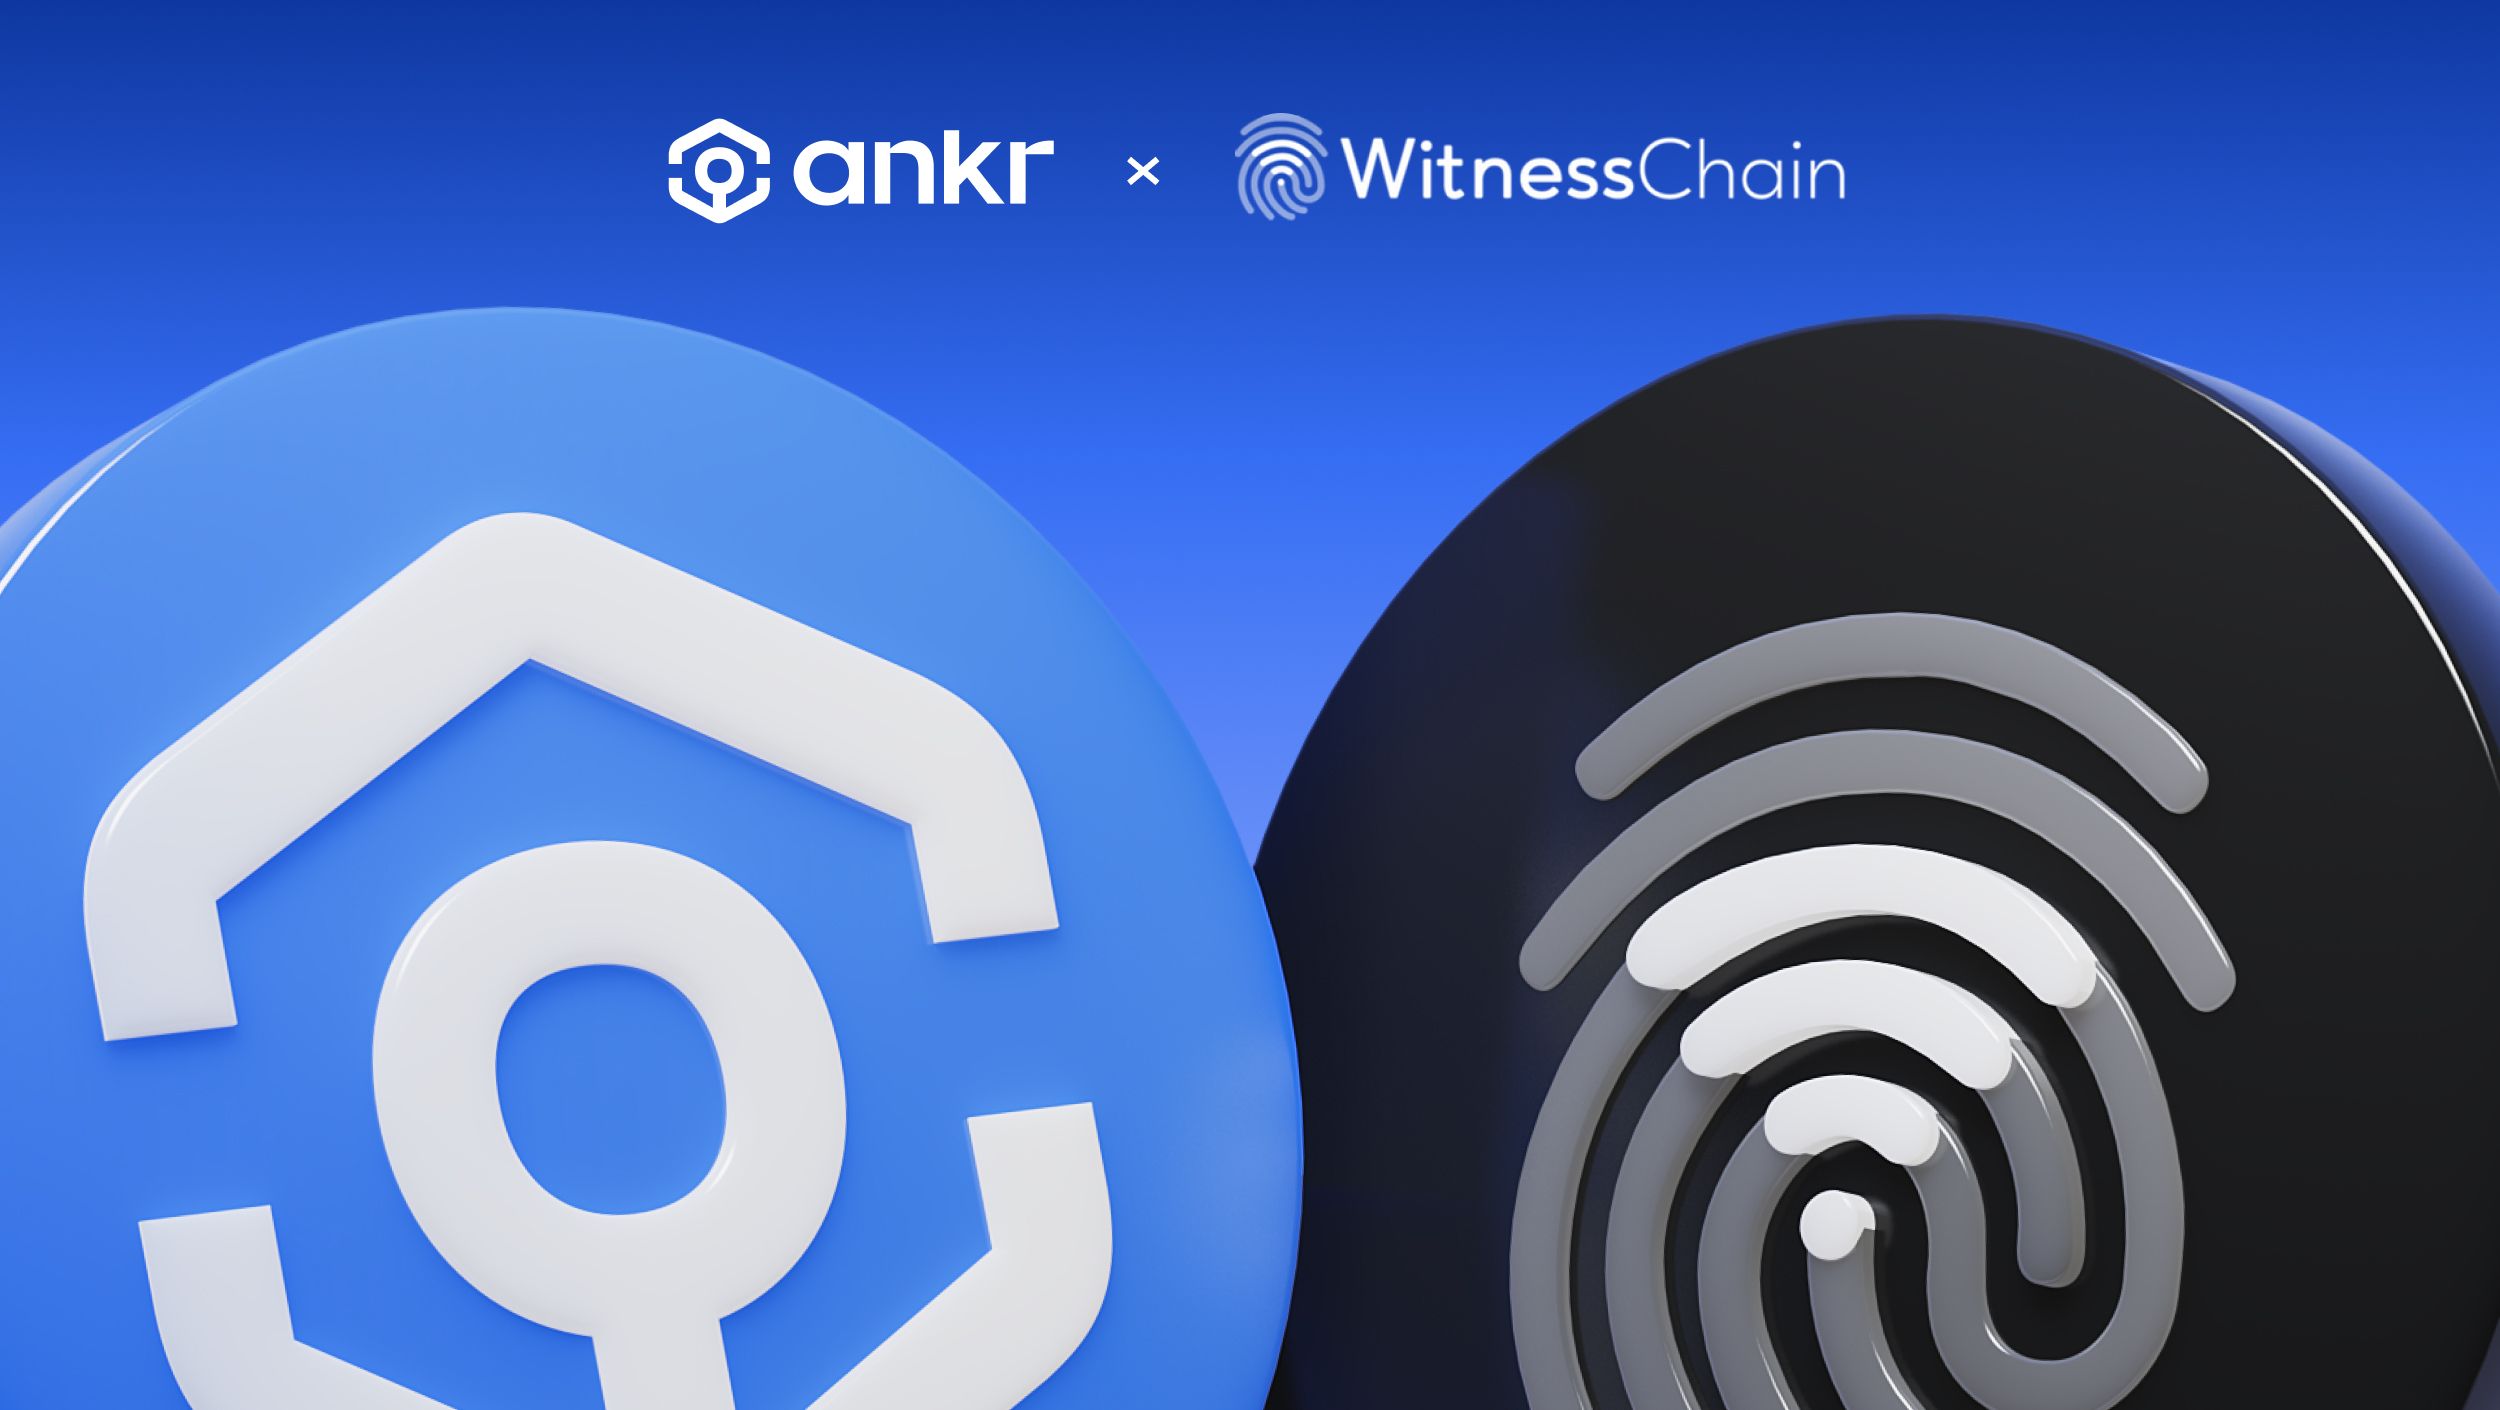 Ankr & WitnessChain Team Up For DePIN and AVS Innovation